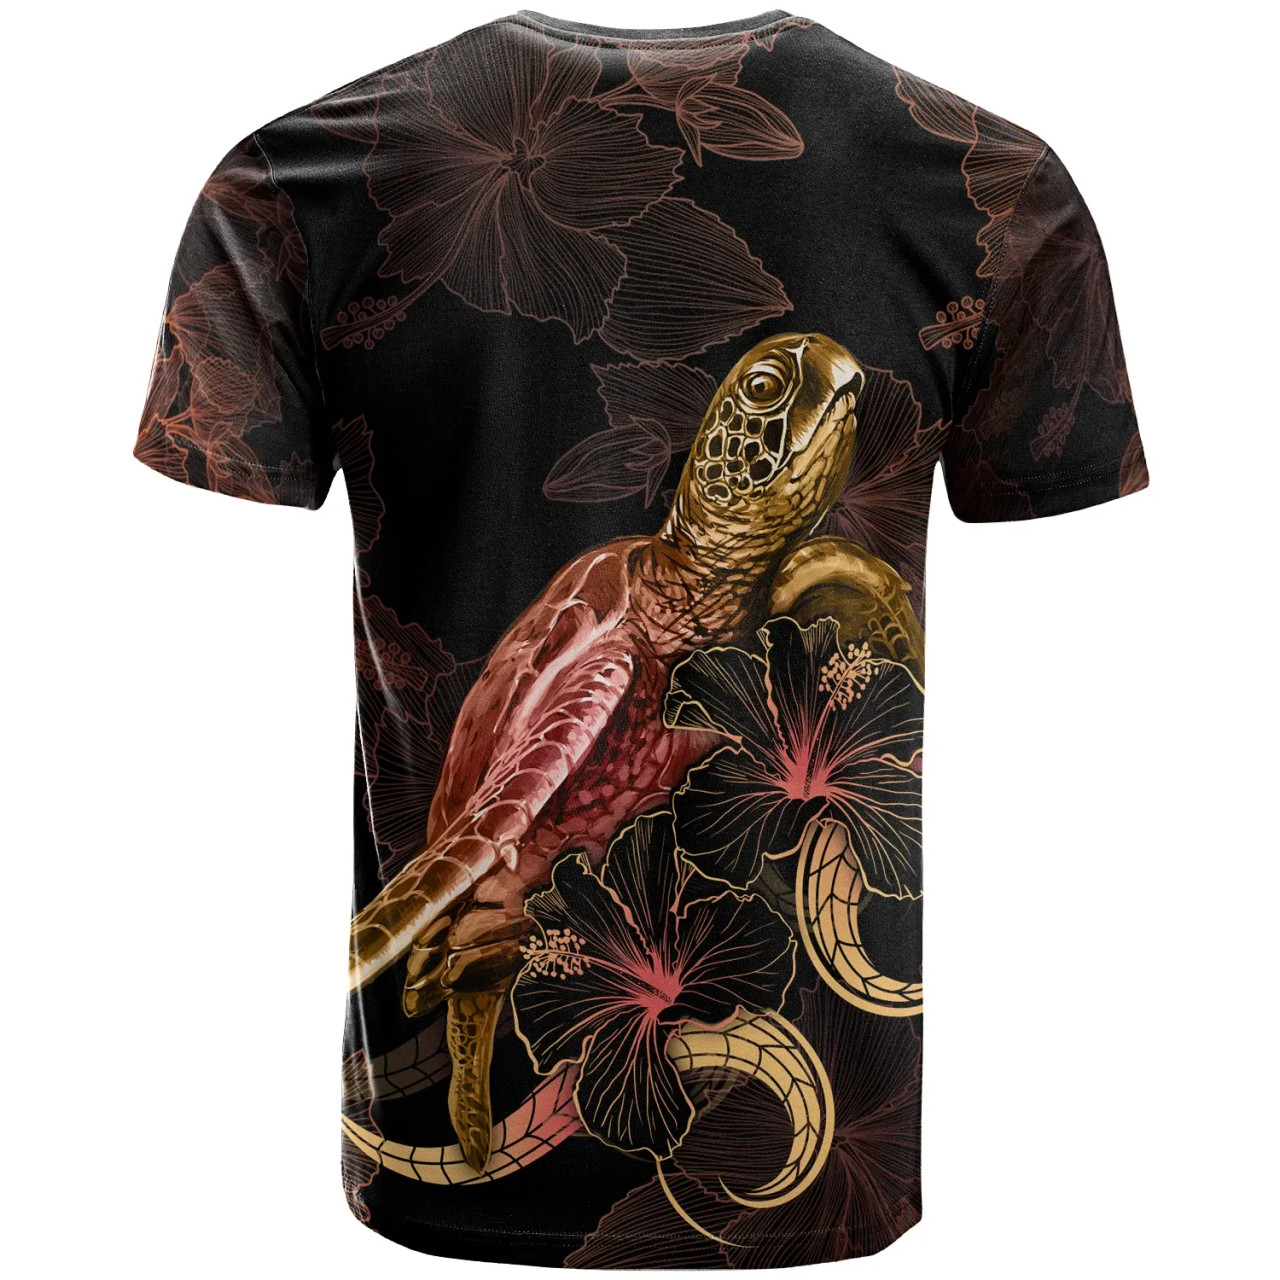 FIJI Polyneisan T-Shirt - Turtle With Blooming Hibiscus Gold 2